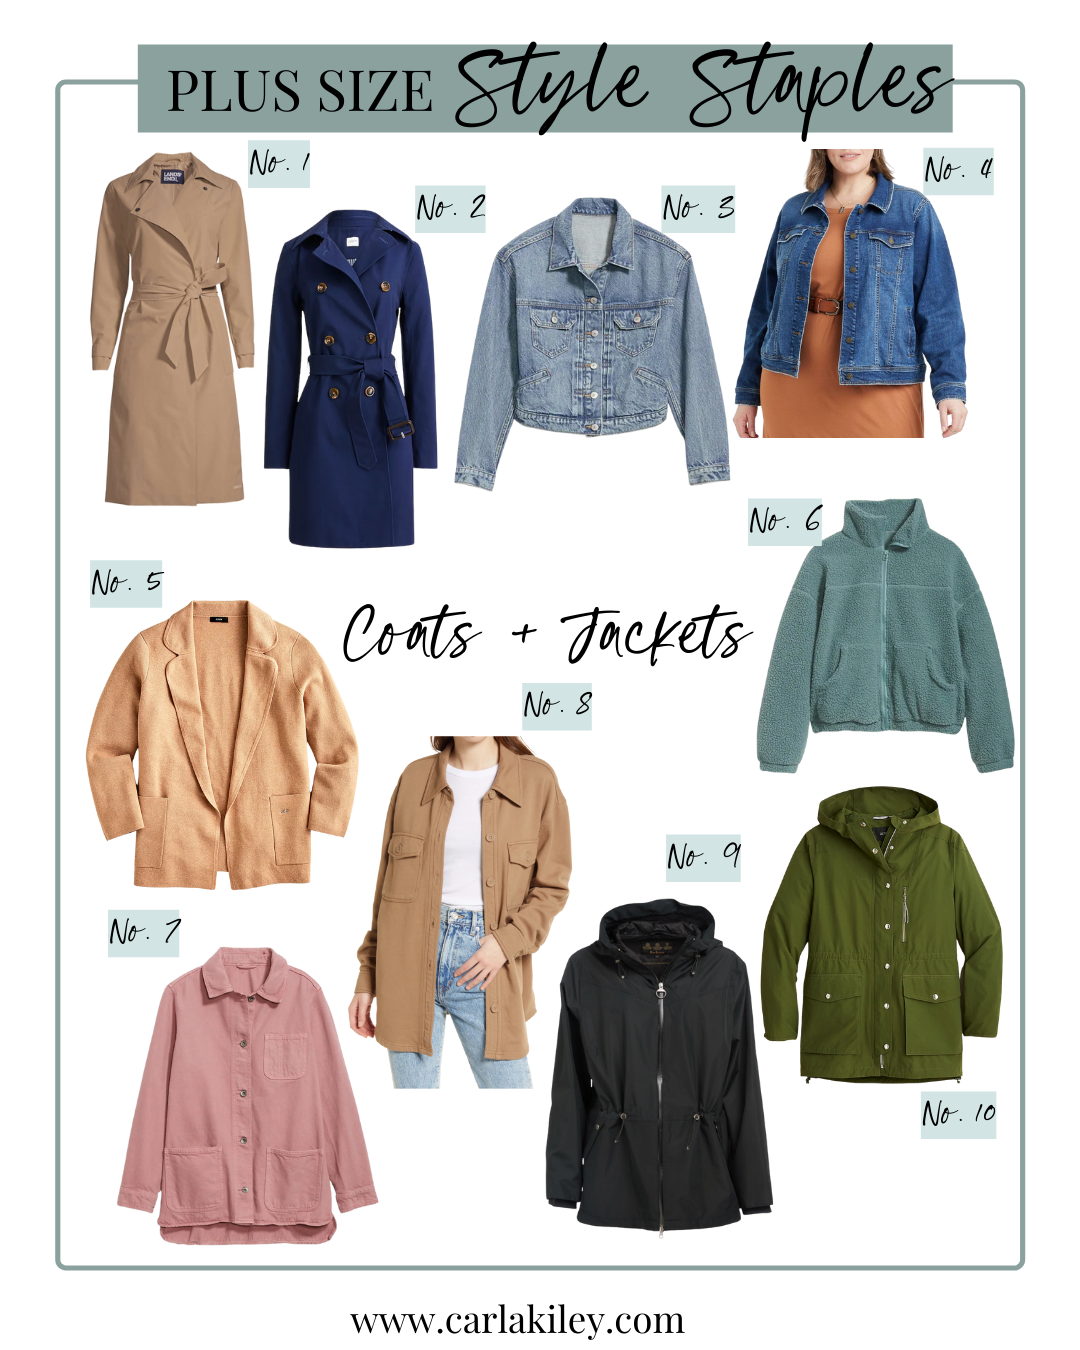 10 Plus Size Lightweight Jackets You Need for Spring - www.carlakiley.com